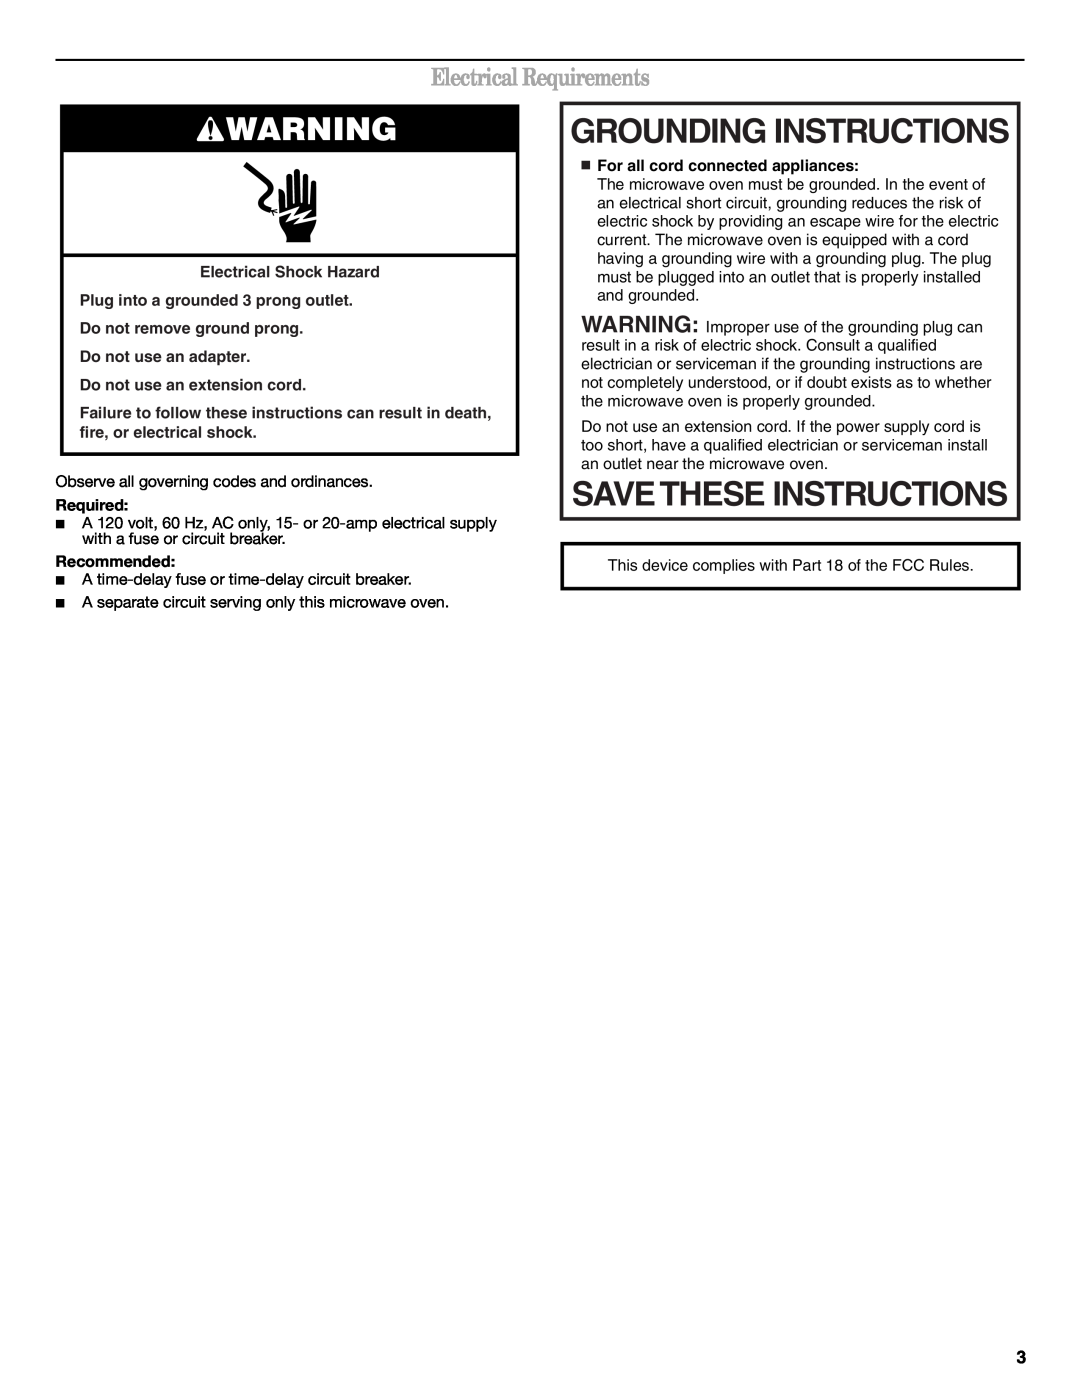 Whirlpool WMH53520AH Grounding Instructions, Electrical Requirements, Save These Instructions, Required, Recommended 